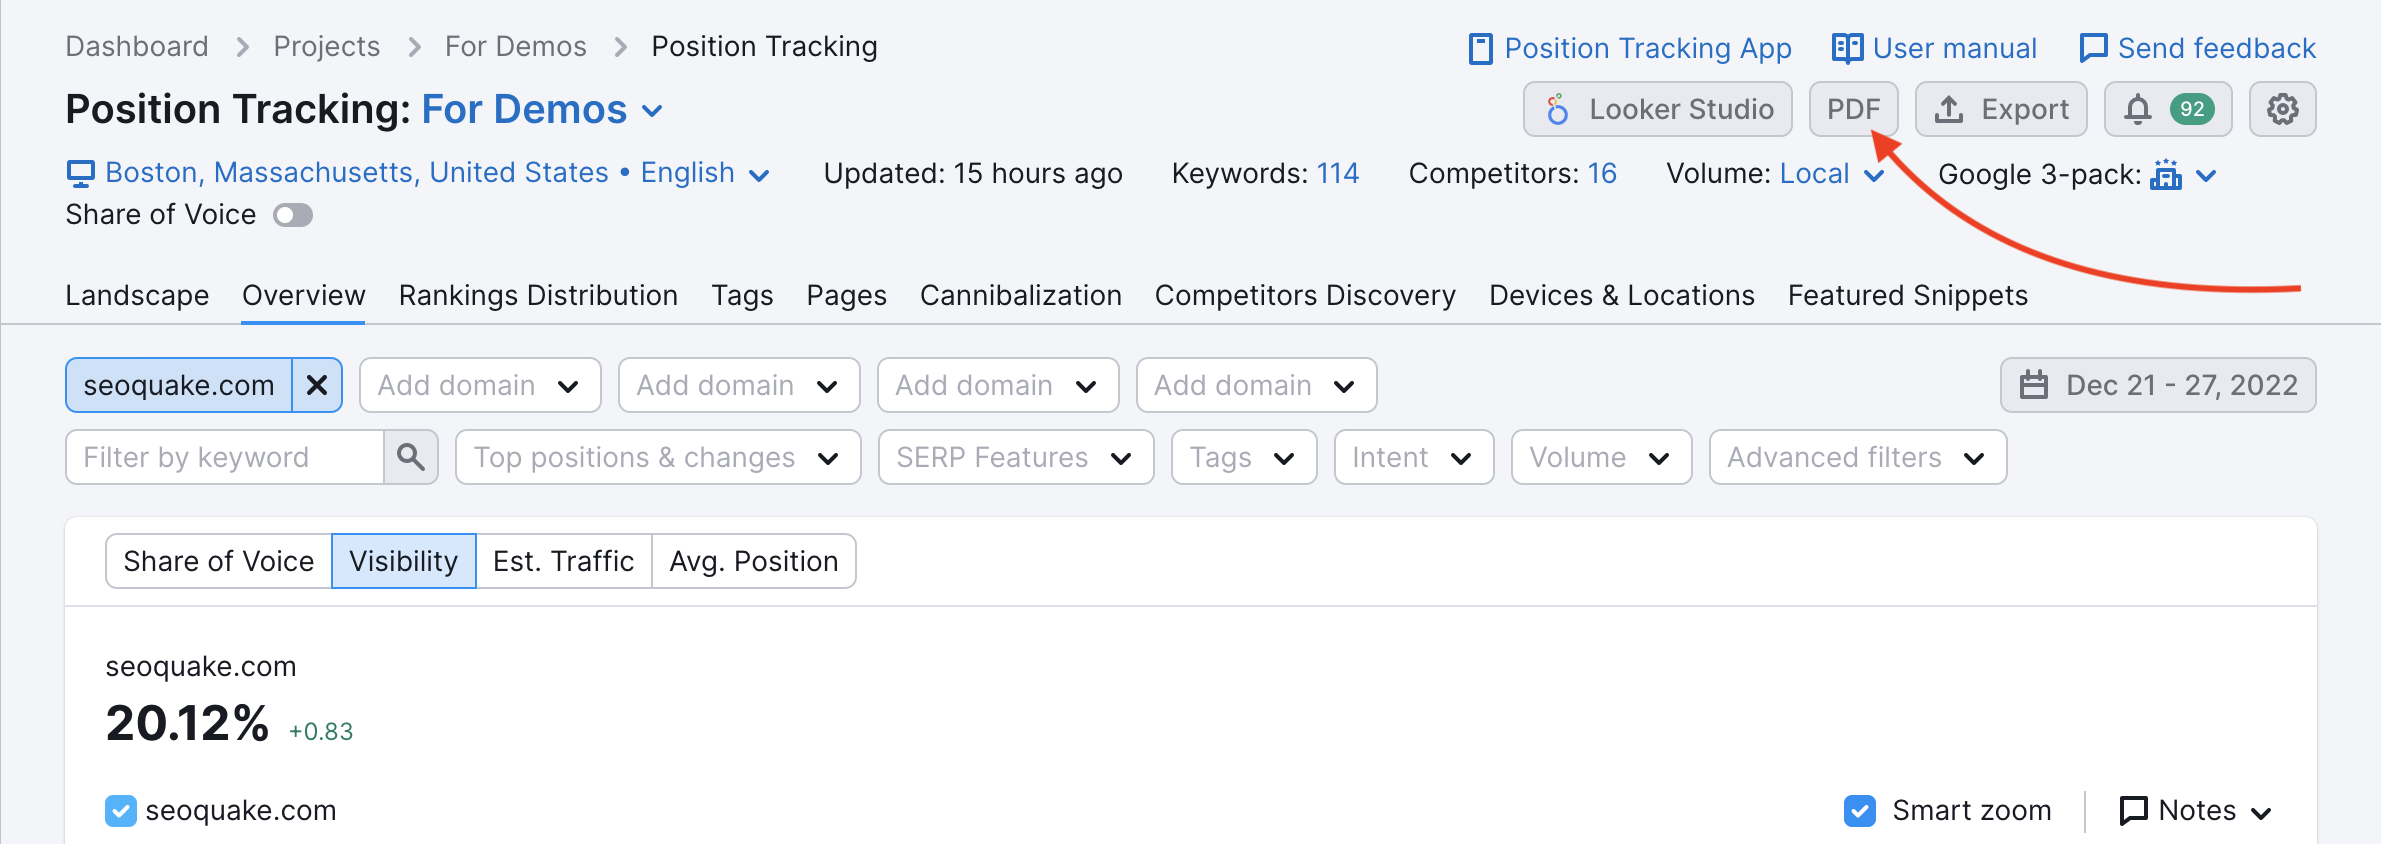 Exporting to PDF in Position Tracking